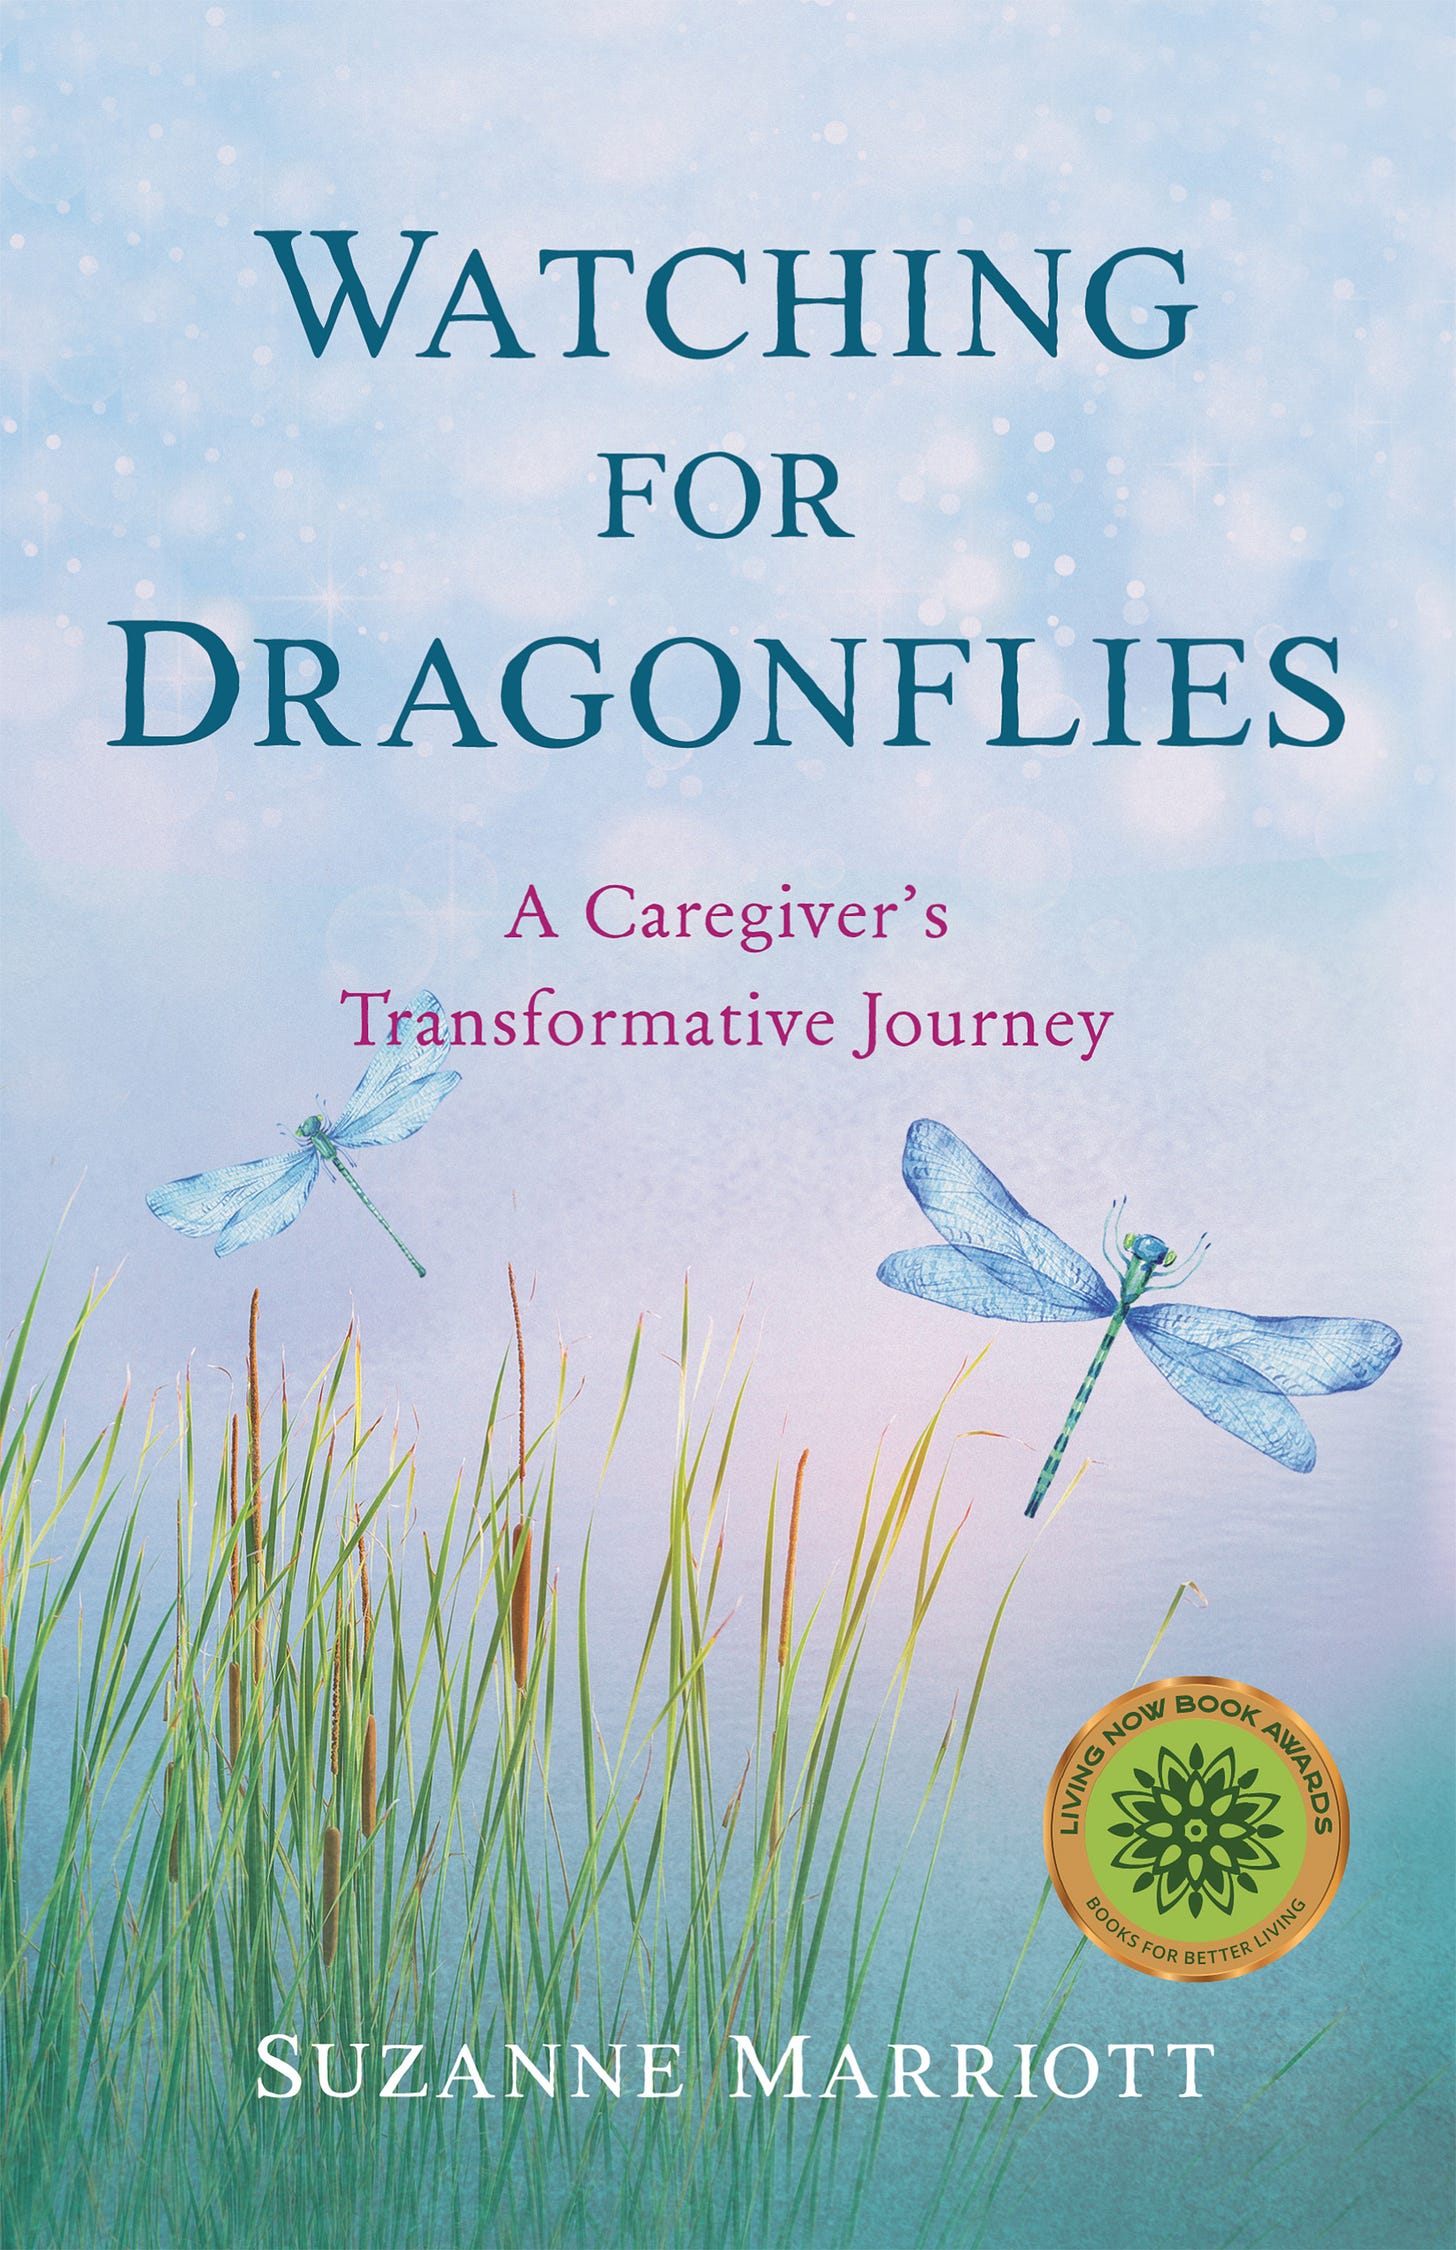 A book cover with dragonflies and grass

Description automatically generated